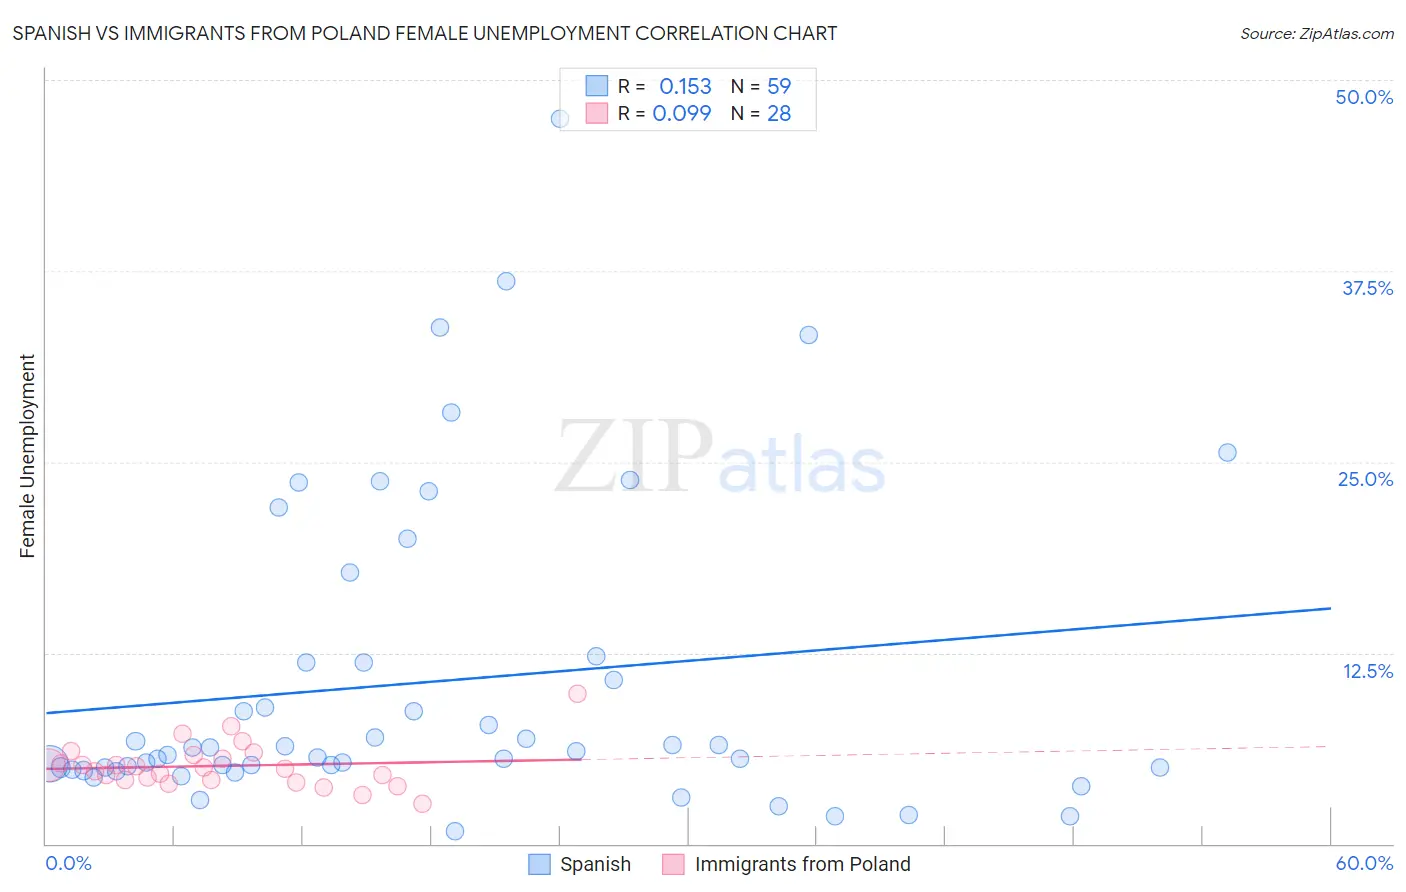 Spanish vs Immigrants from Poland Female Unemployment